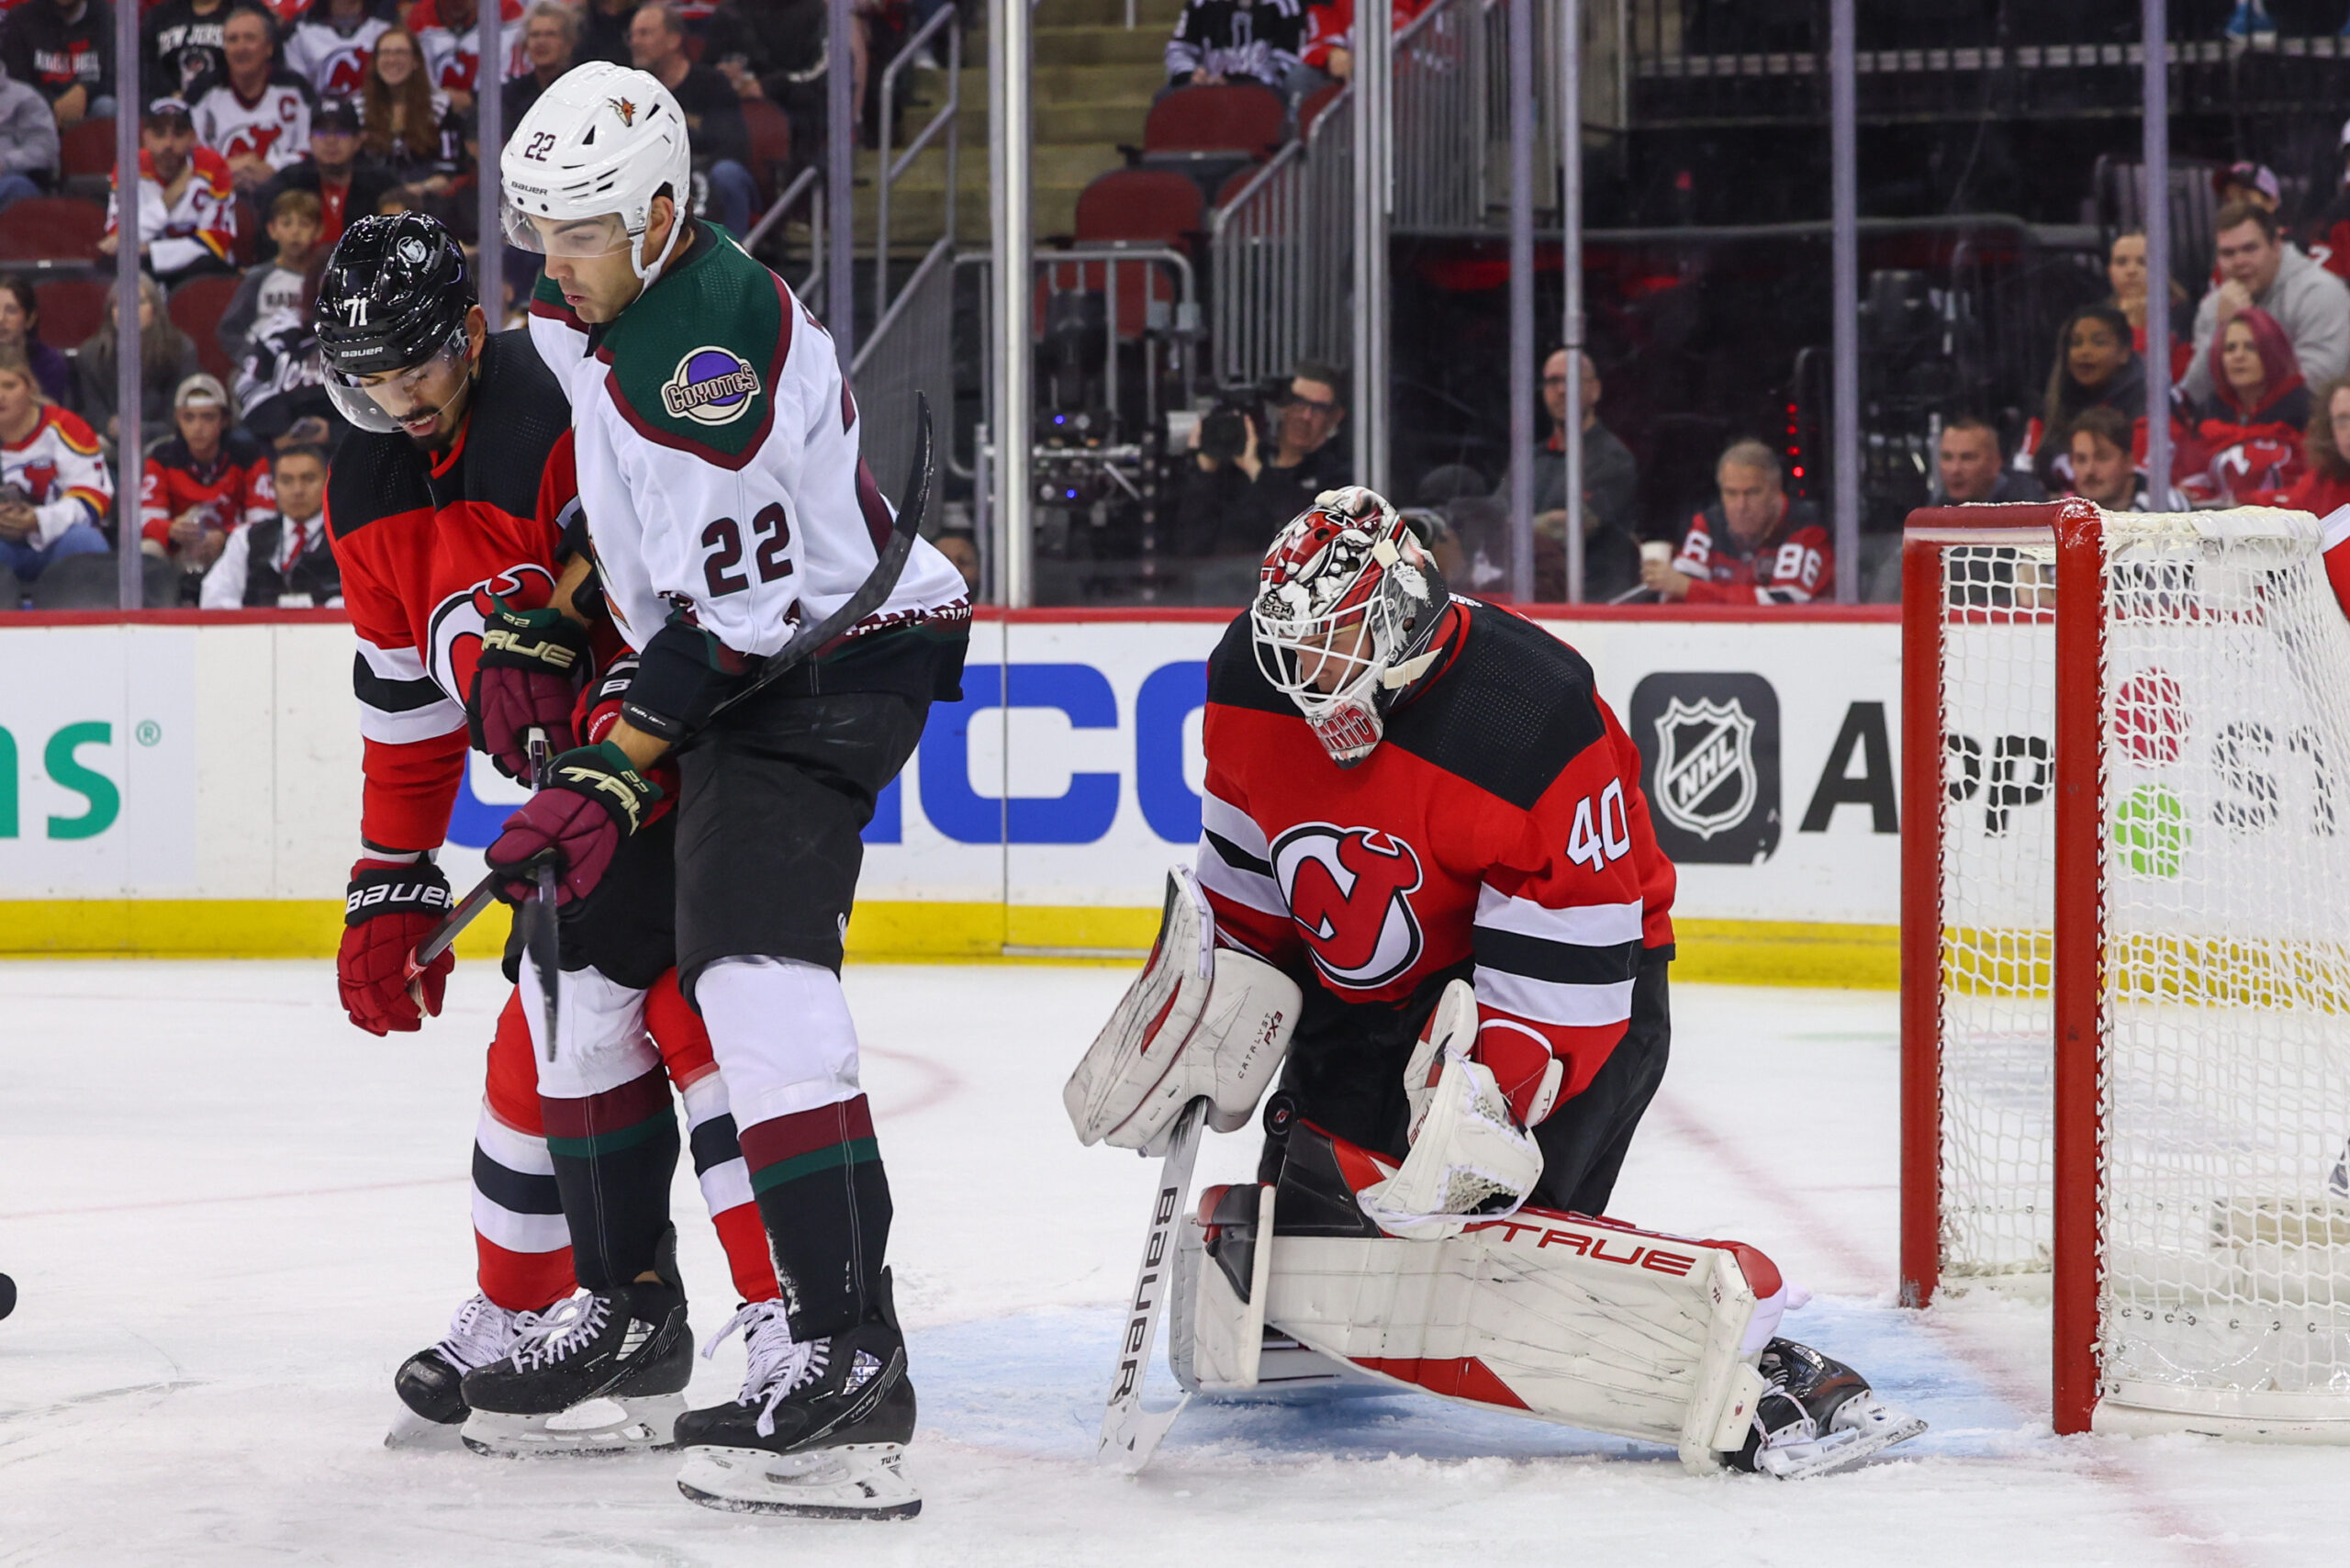 New Jersey Devils: Good to see ya back out there, Cap!